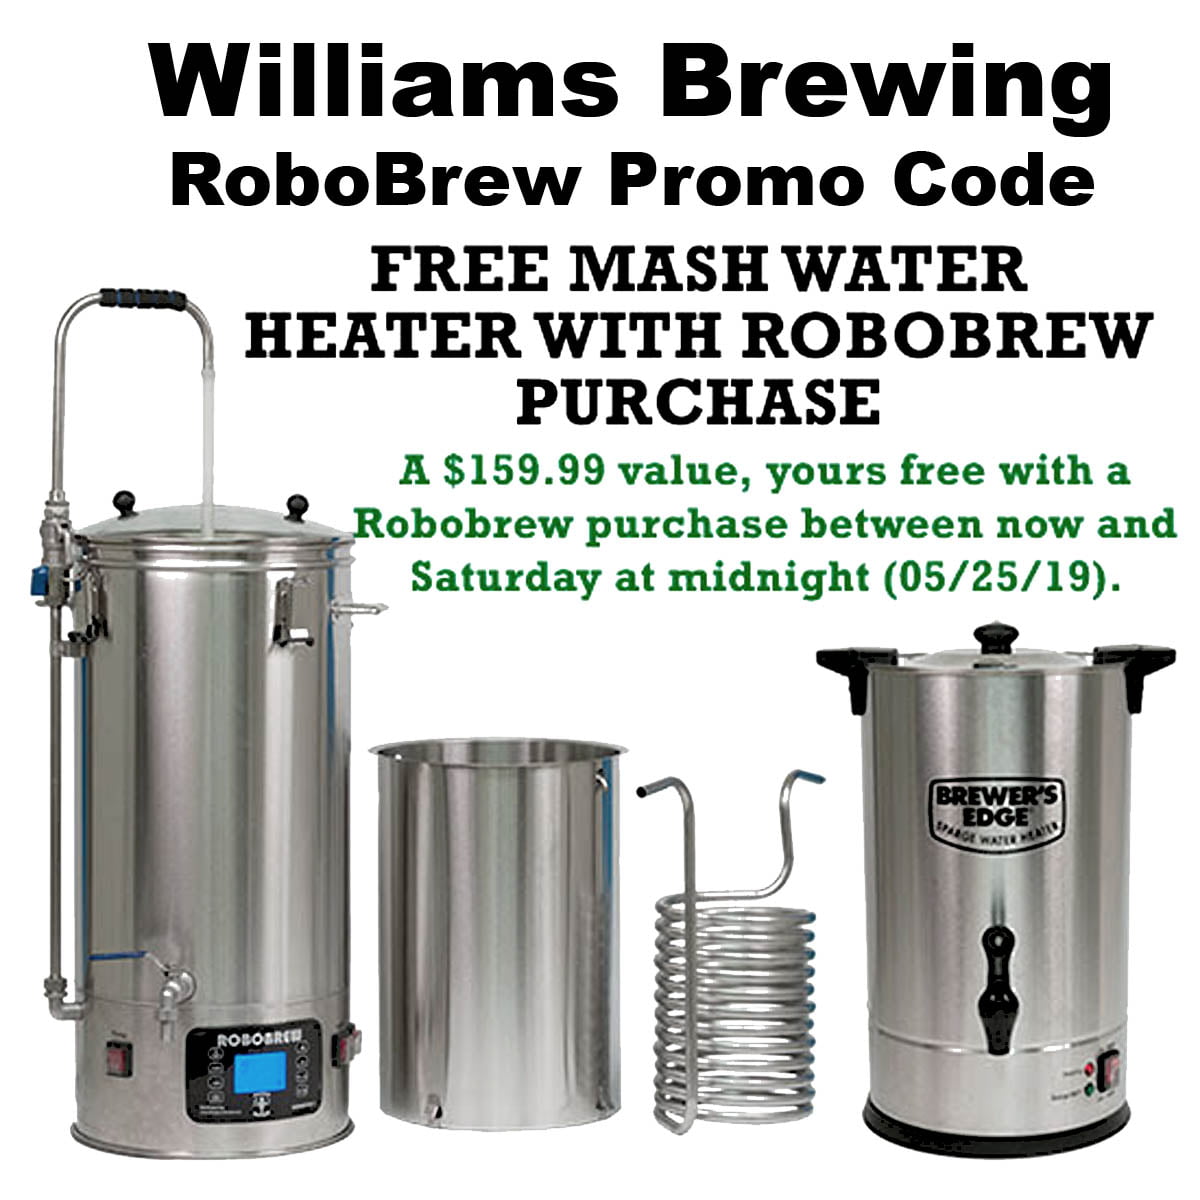 Williams Brewing Promo Code Free Sparge Water Heater With The Purchase Of A RoboBrew